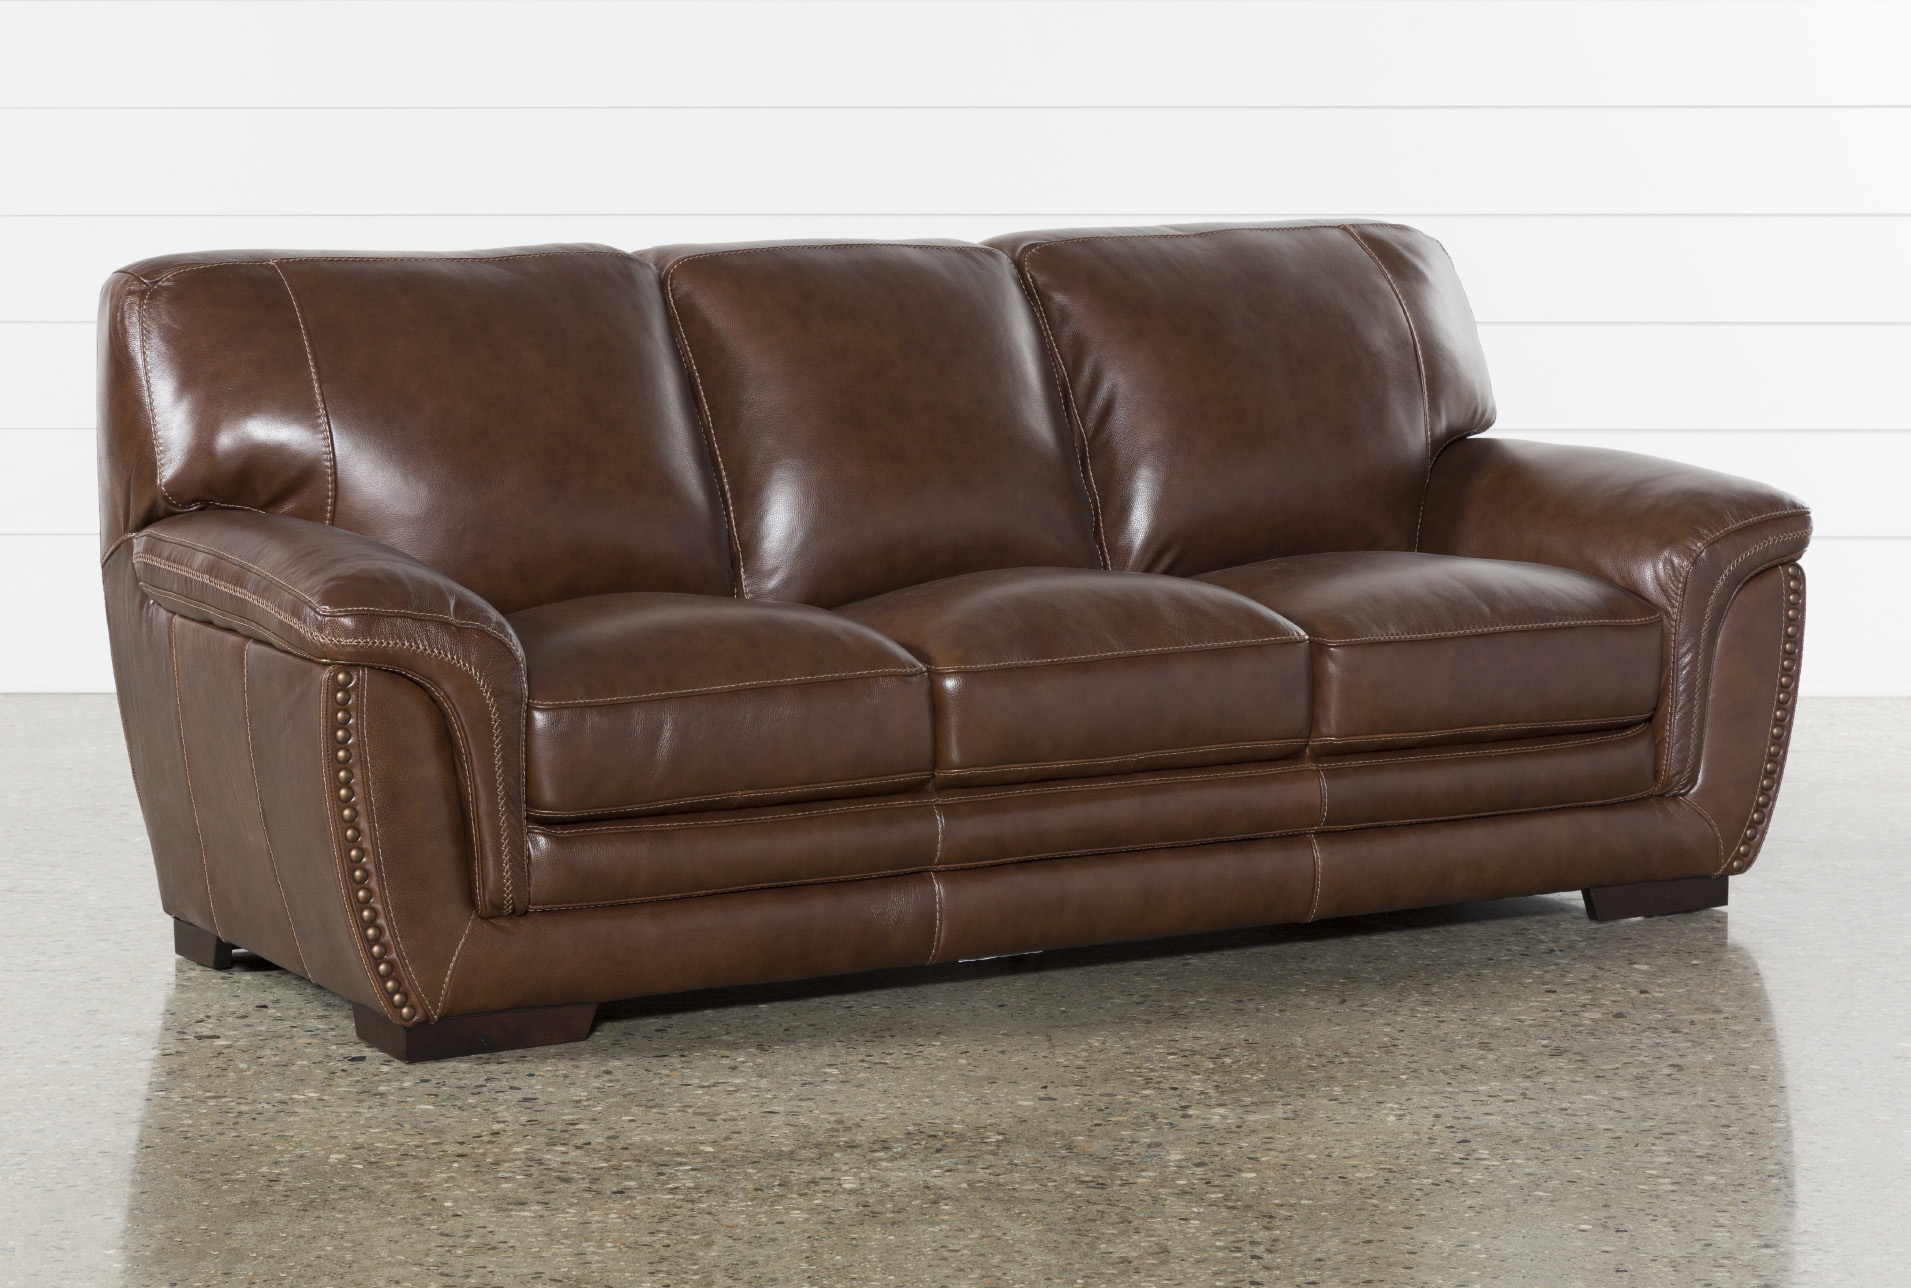 brown leather sofa with red pillows